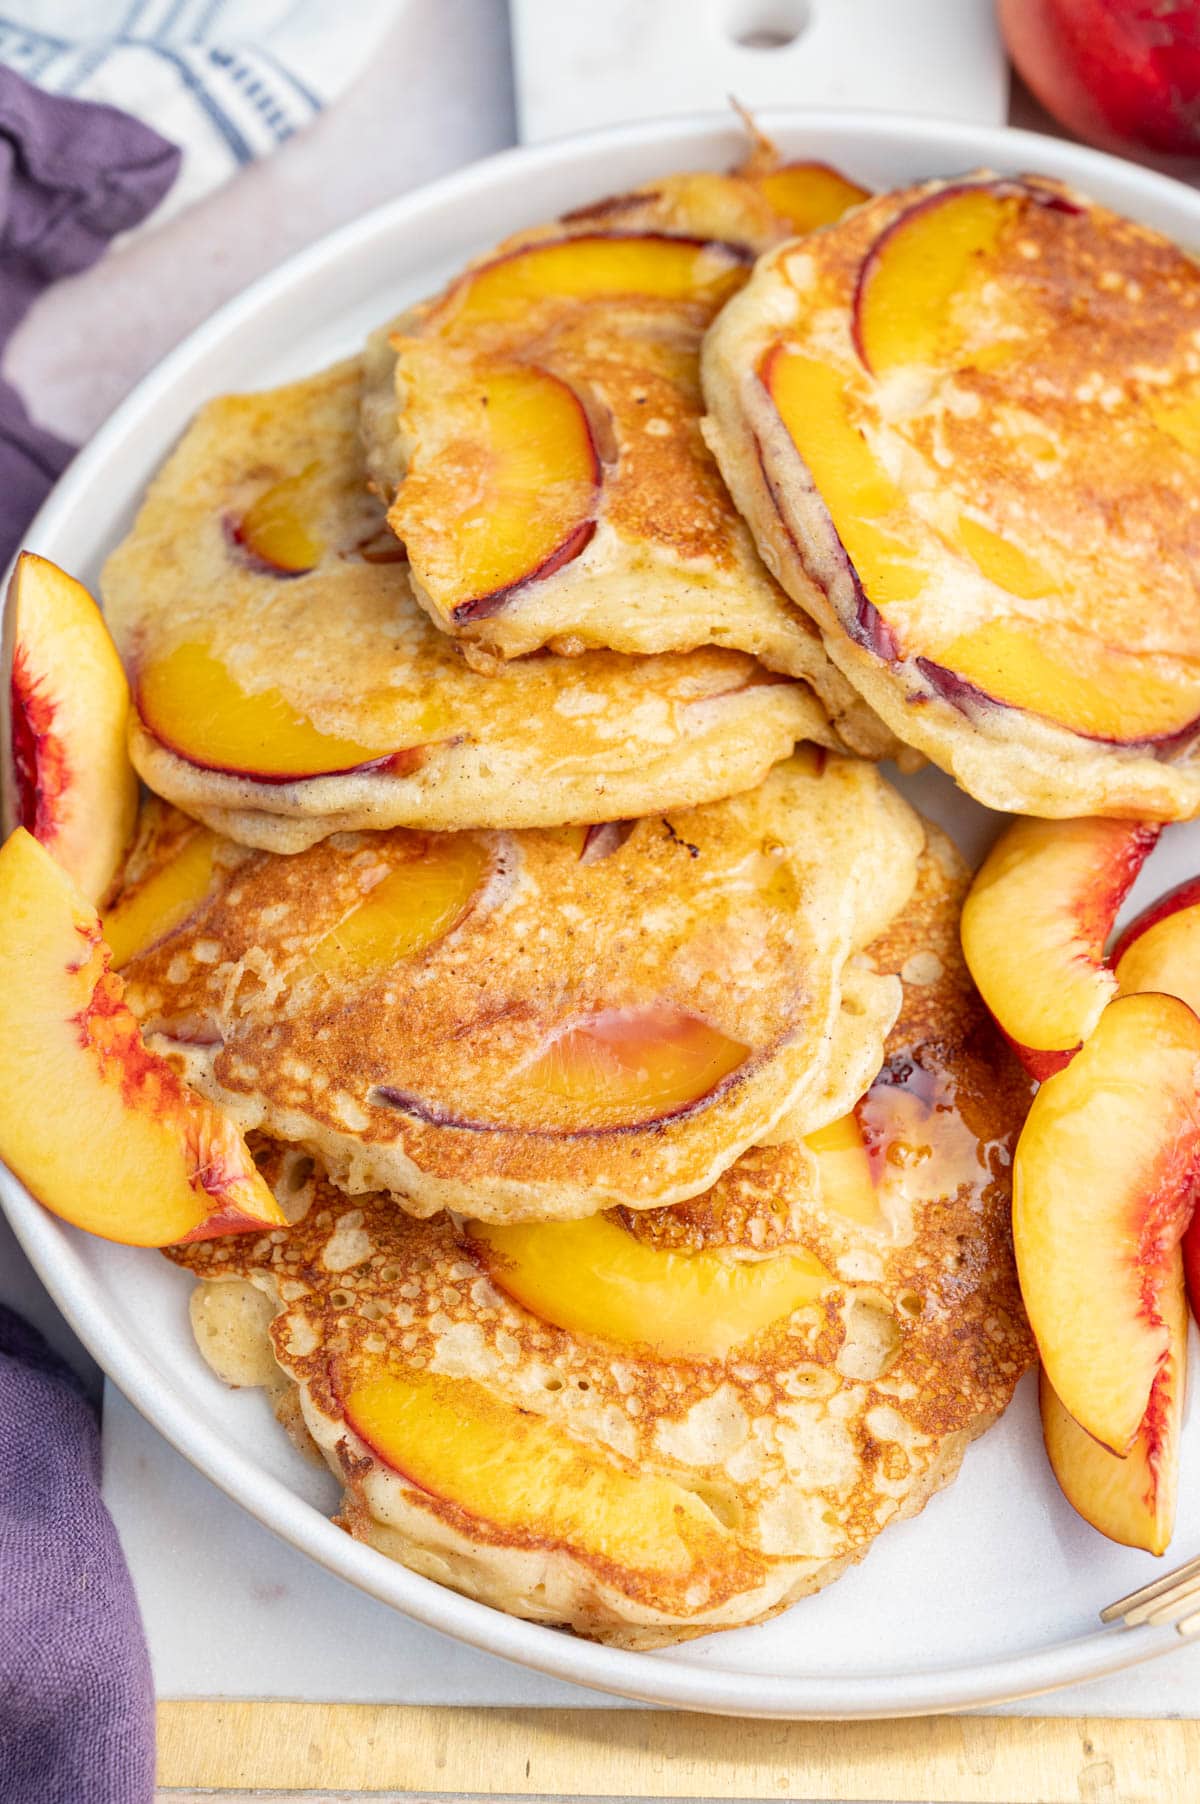 Peach pancakes on a white plate with fresh peach wedges on the side.